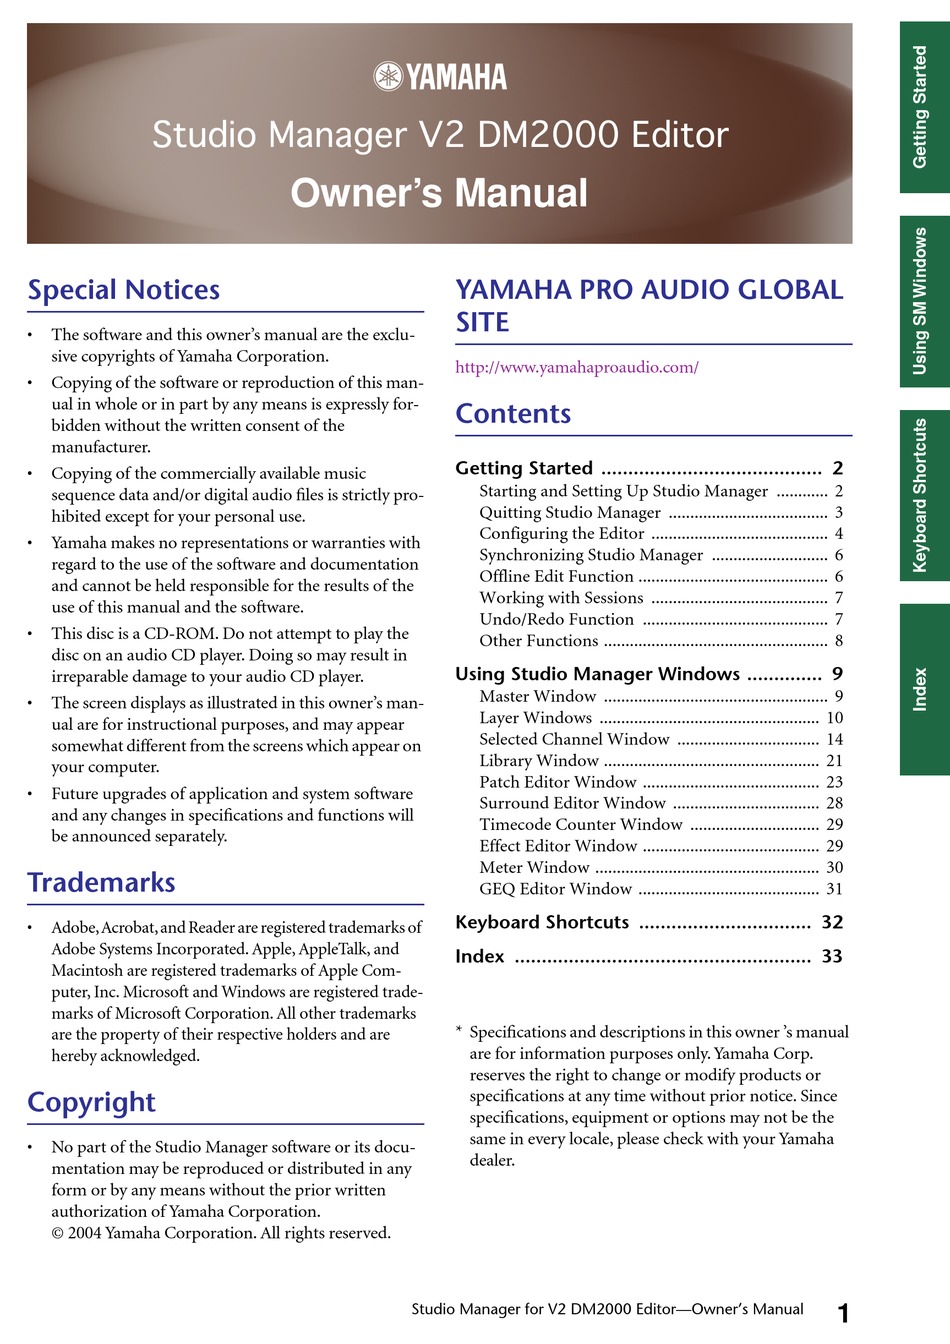 yamaha studio manager file extensions